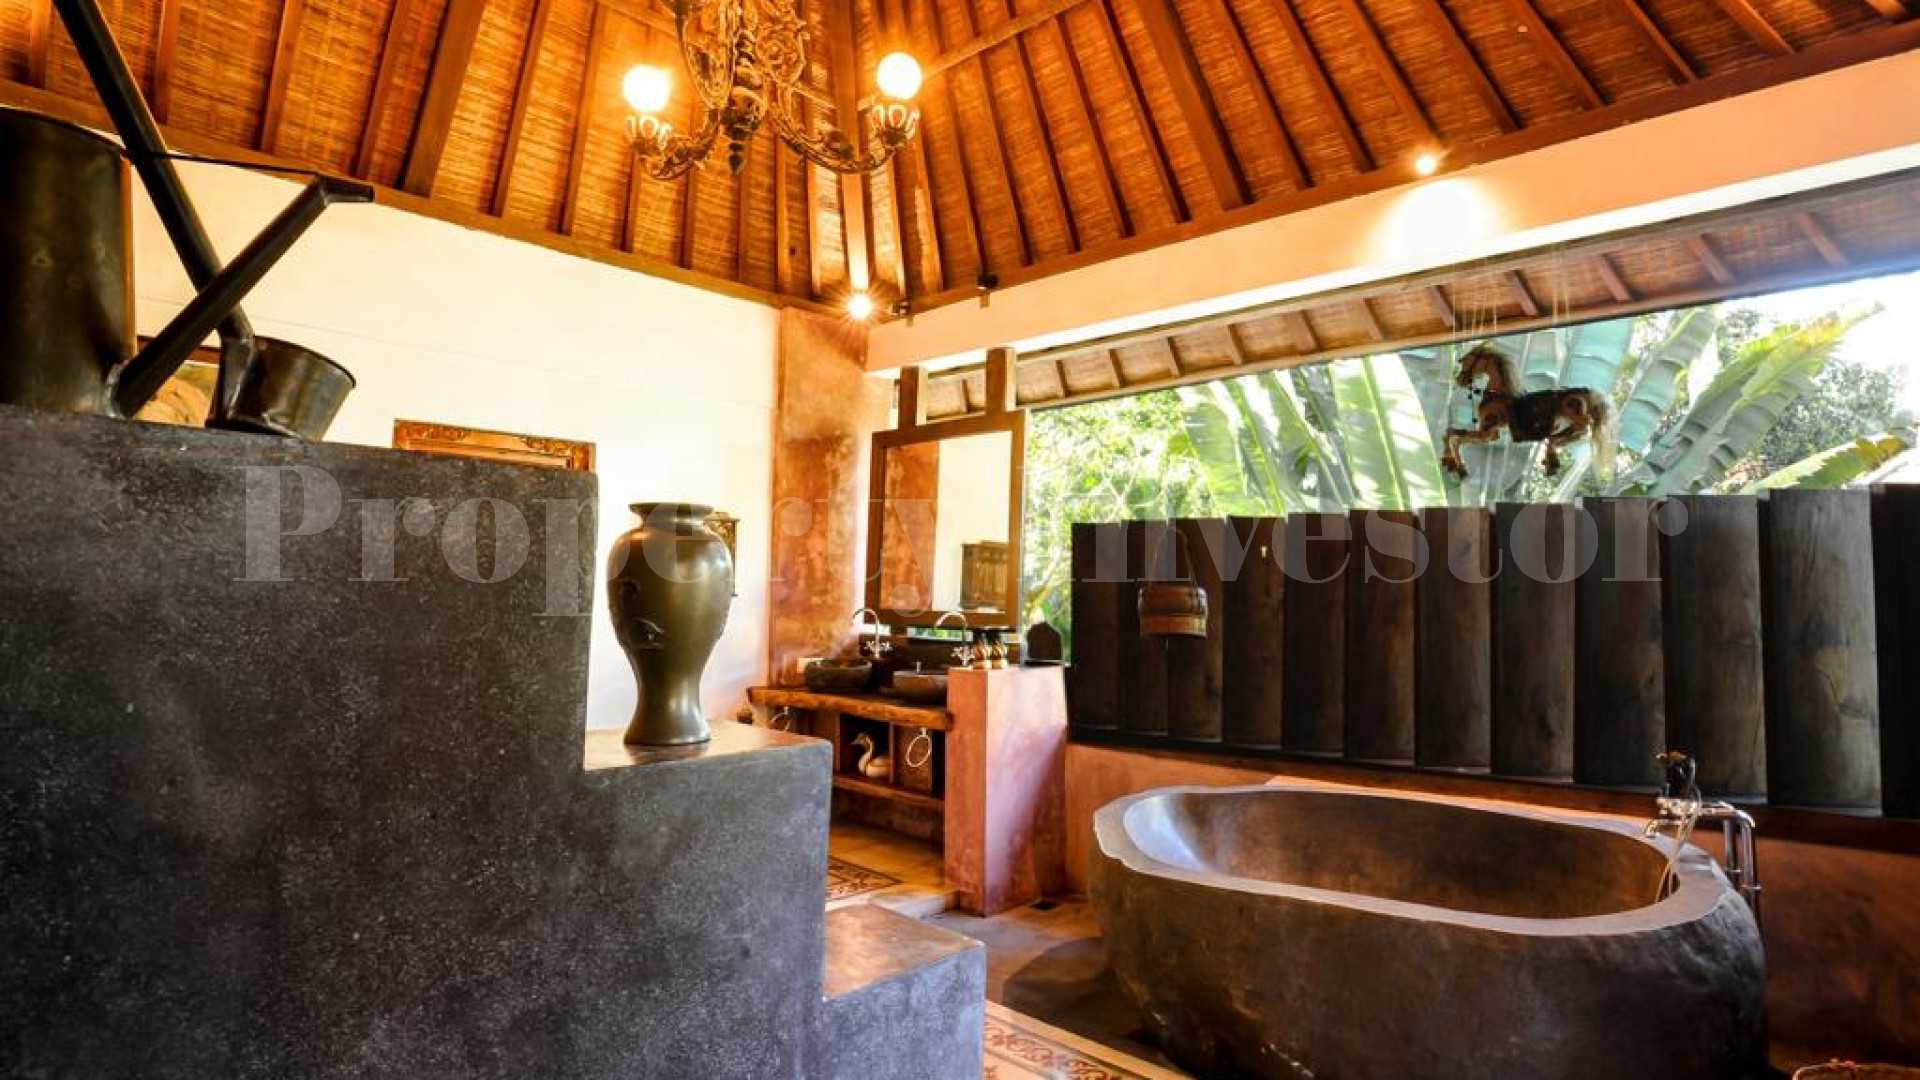 Newly Renovated 5 Bedroom Traditional Luxury Villa with Stunning Tropical River & Jungle Views for Sale in South Ubud, Bali